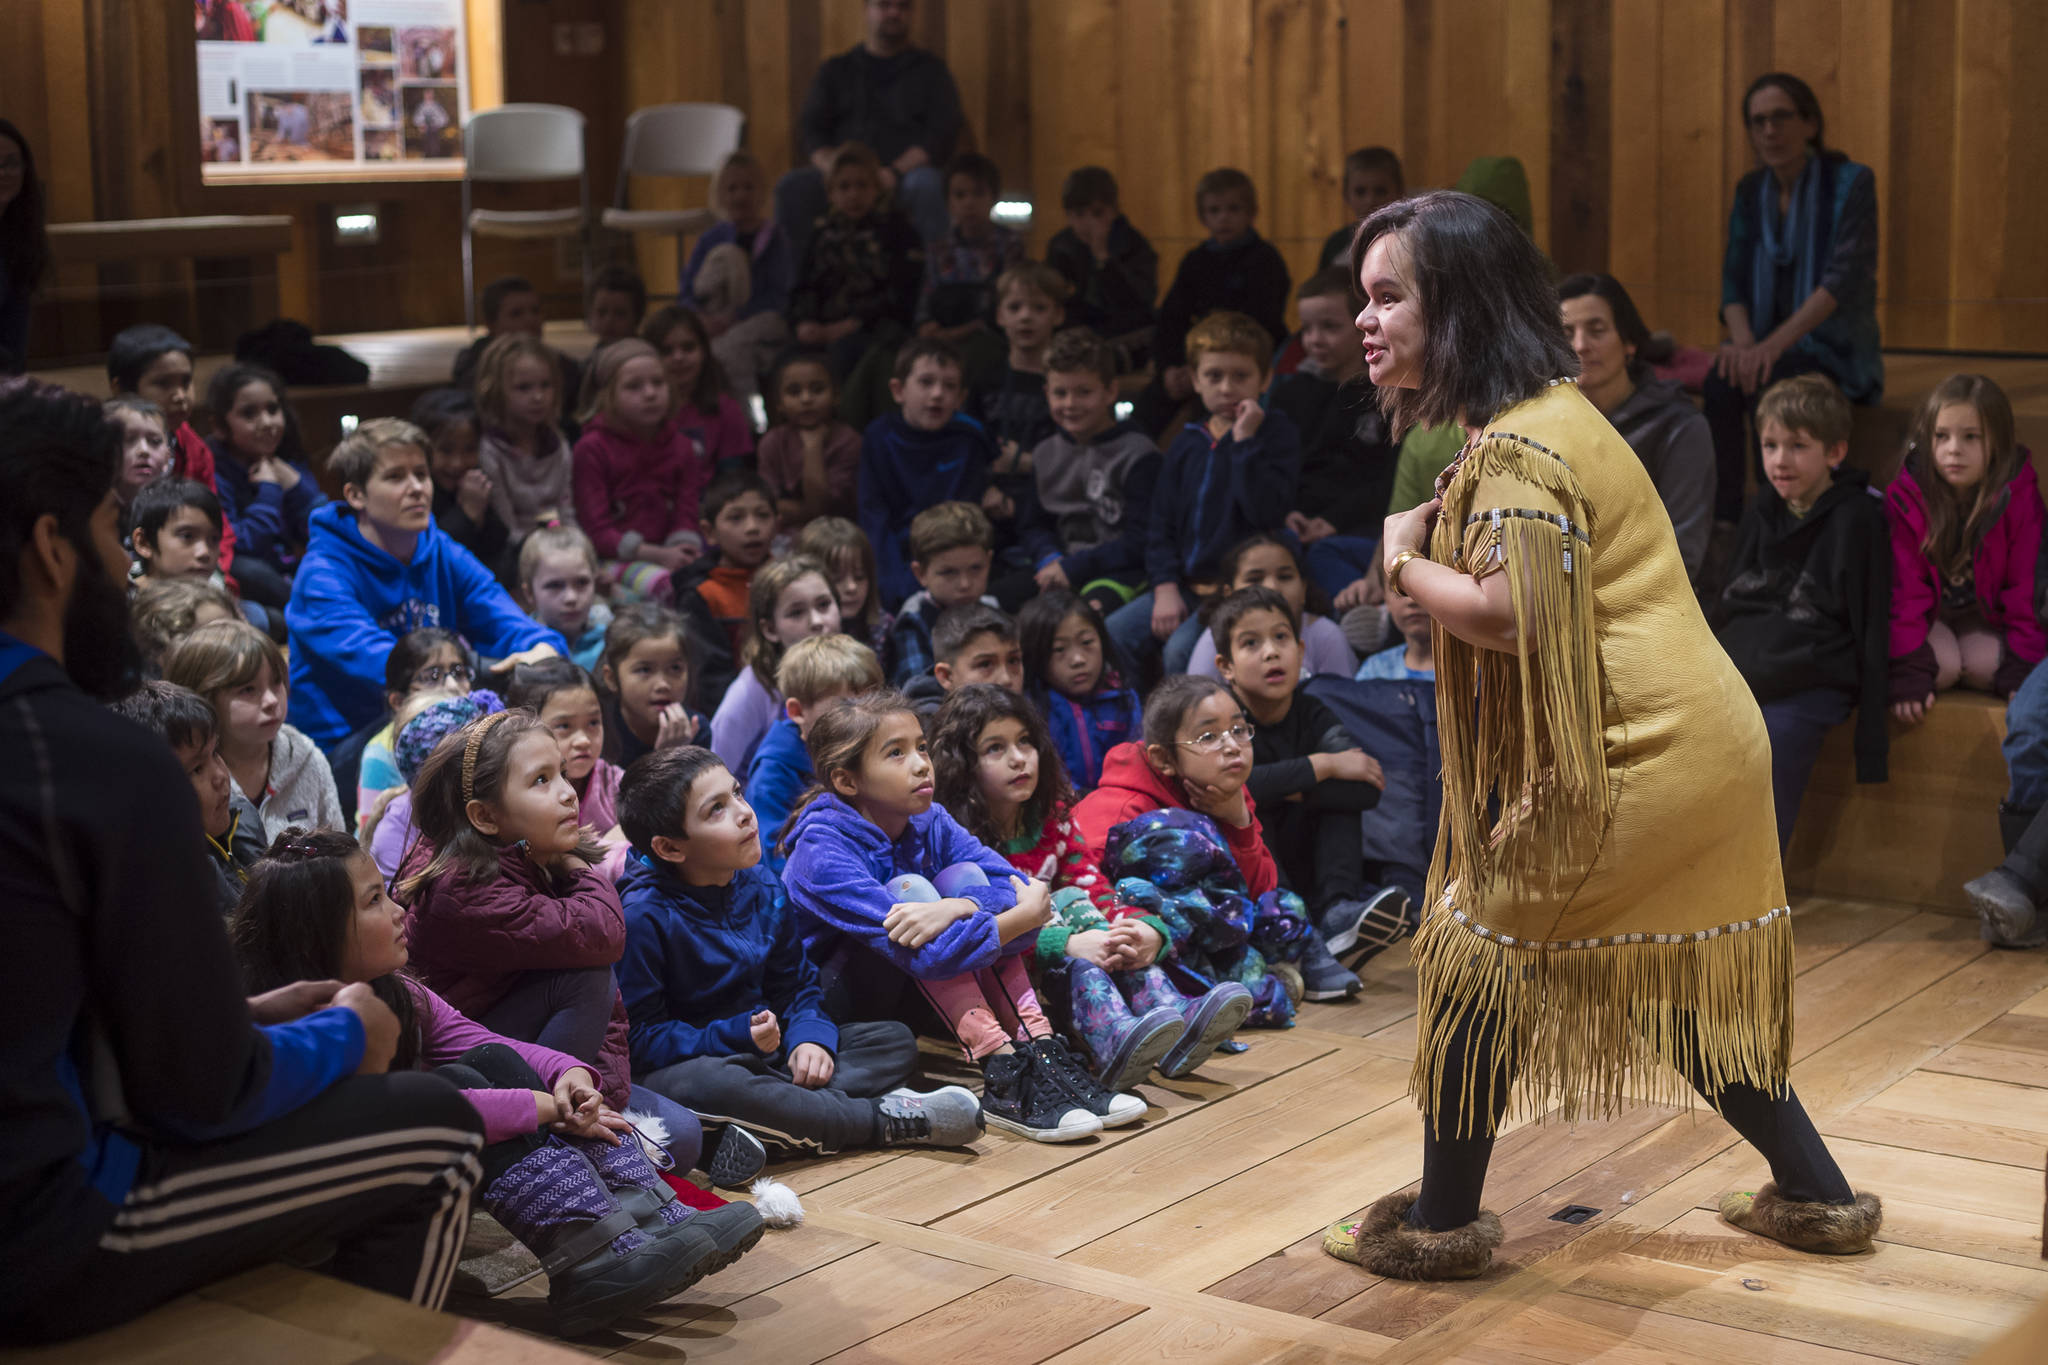 Lily Hope tells a story of raven, king salmon and the birds to second grade students from Harborview Elementary, Montessori Borealis and Juneau Charter Community School at the Walter Soboleff Center on Friday Nov. 30, 2018. The Storytelling Excursion for all Juneau School District second graders is part of the Any Given Child programming sponsored by the Juneau School District, Mayor’s office, University of Alaska Southeast, Sealaska Heritage Institute and the Juneau Arts and Humanities Council. The Storytelling Excursion is funded by Sealaska Heritage Institute, Behrends Mechanical, Inc., Juneau School District and the Juneau Arts & Humanities Council. (Michael Penn | Juneau Empire)